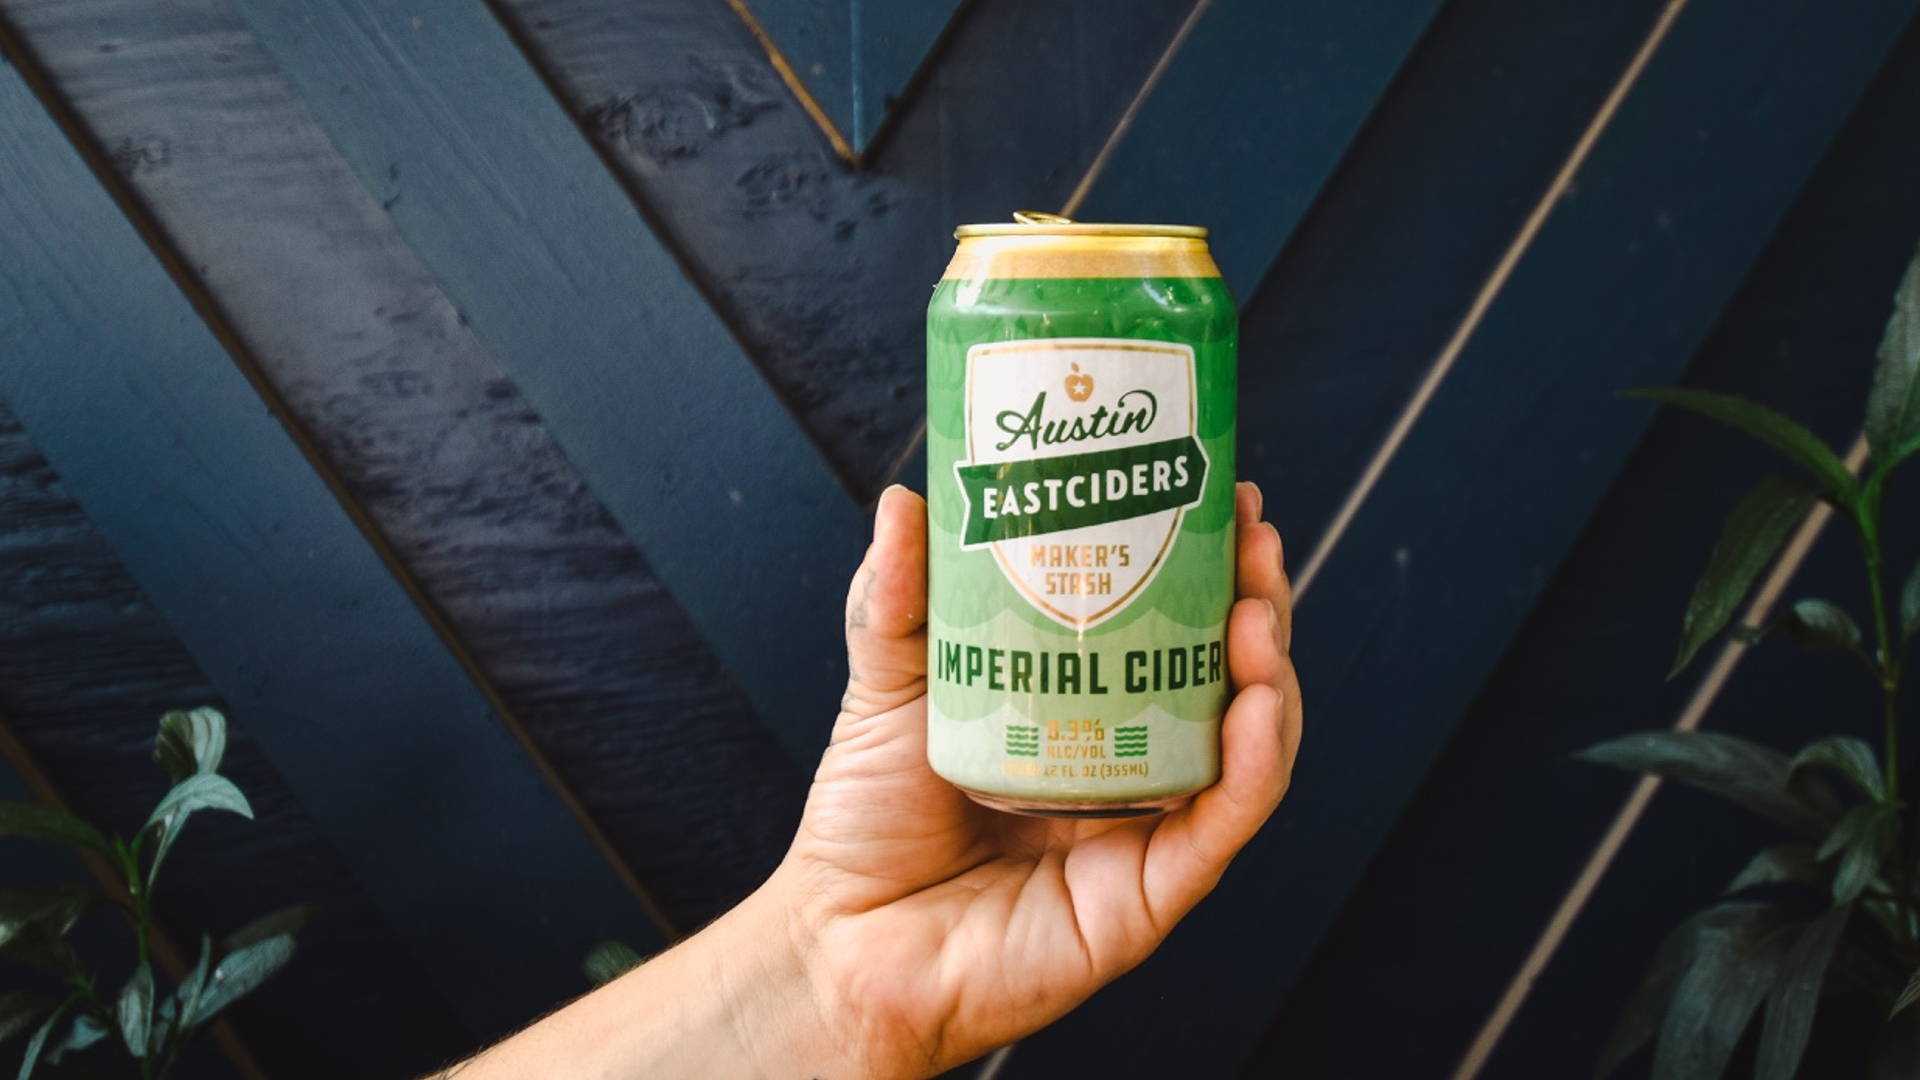 Featured image for Austin Eastciders Taps Aaron Draplin In Its New Packaging